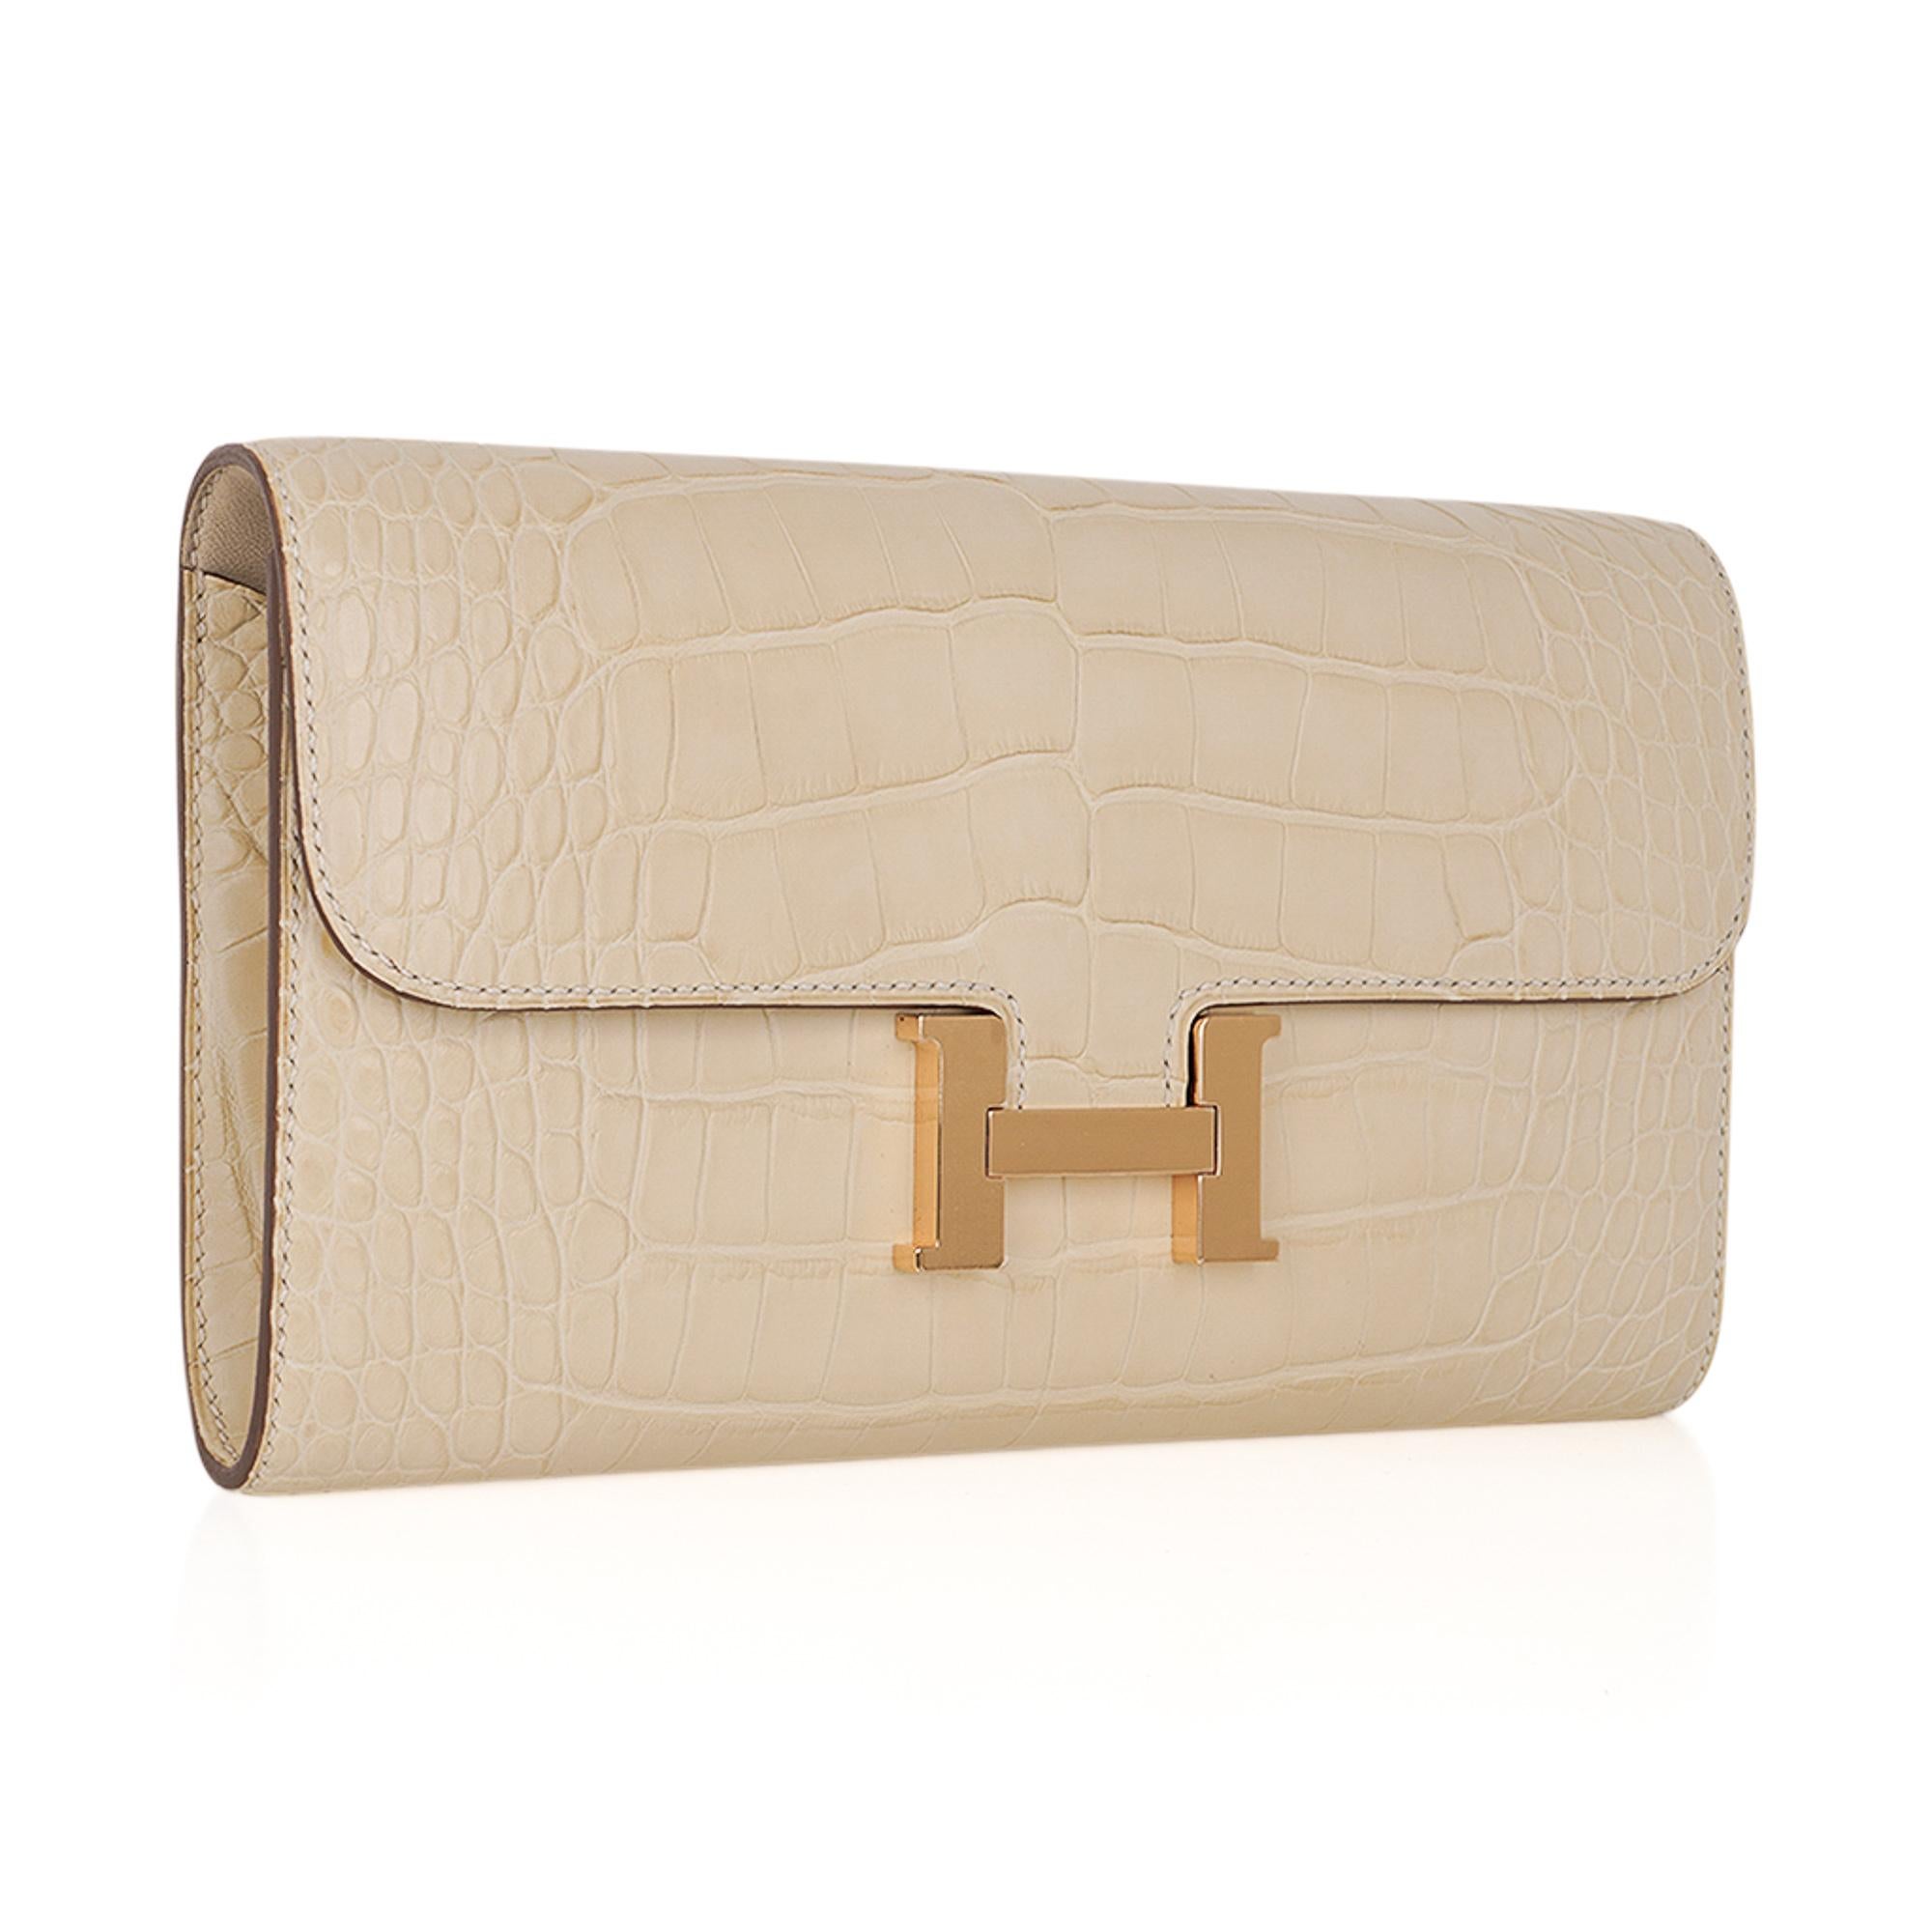 Mightychic offers a coveted Hermes Constance Long
To Go Wallet featured in Vanille Matte Alligator.
This stunning neutral Constance To Go is accentuated with Gold hardware.
Detachable crossbody / shoulder strap converts this gorgeous Constance Long